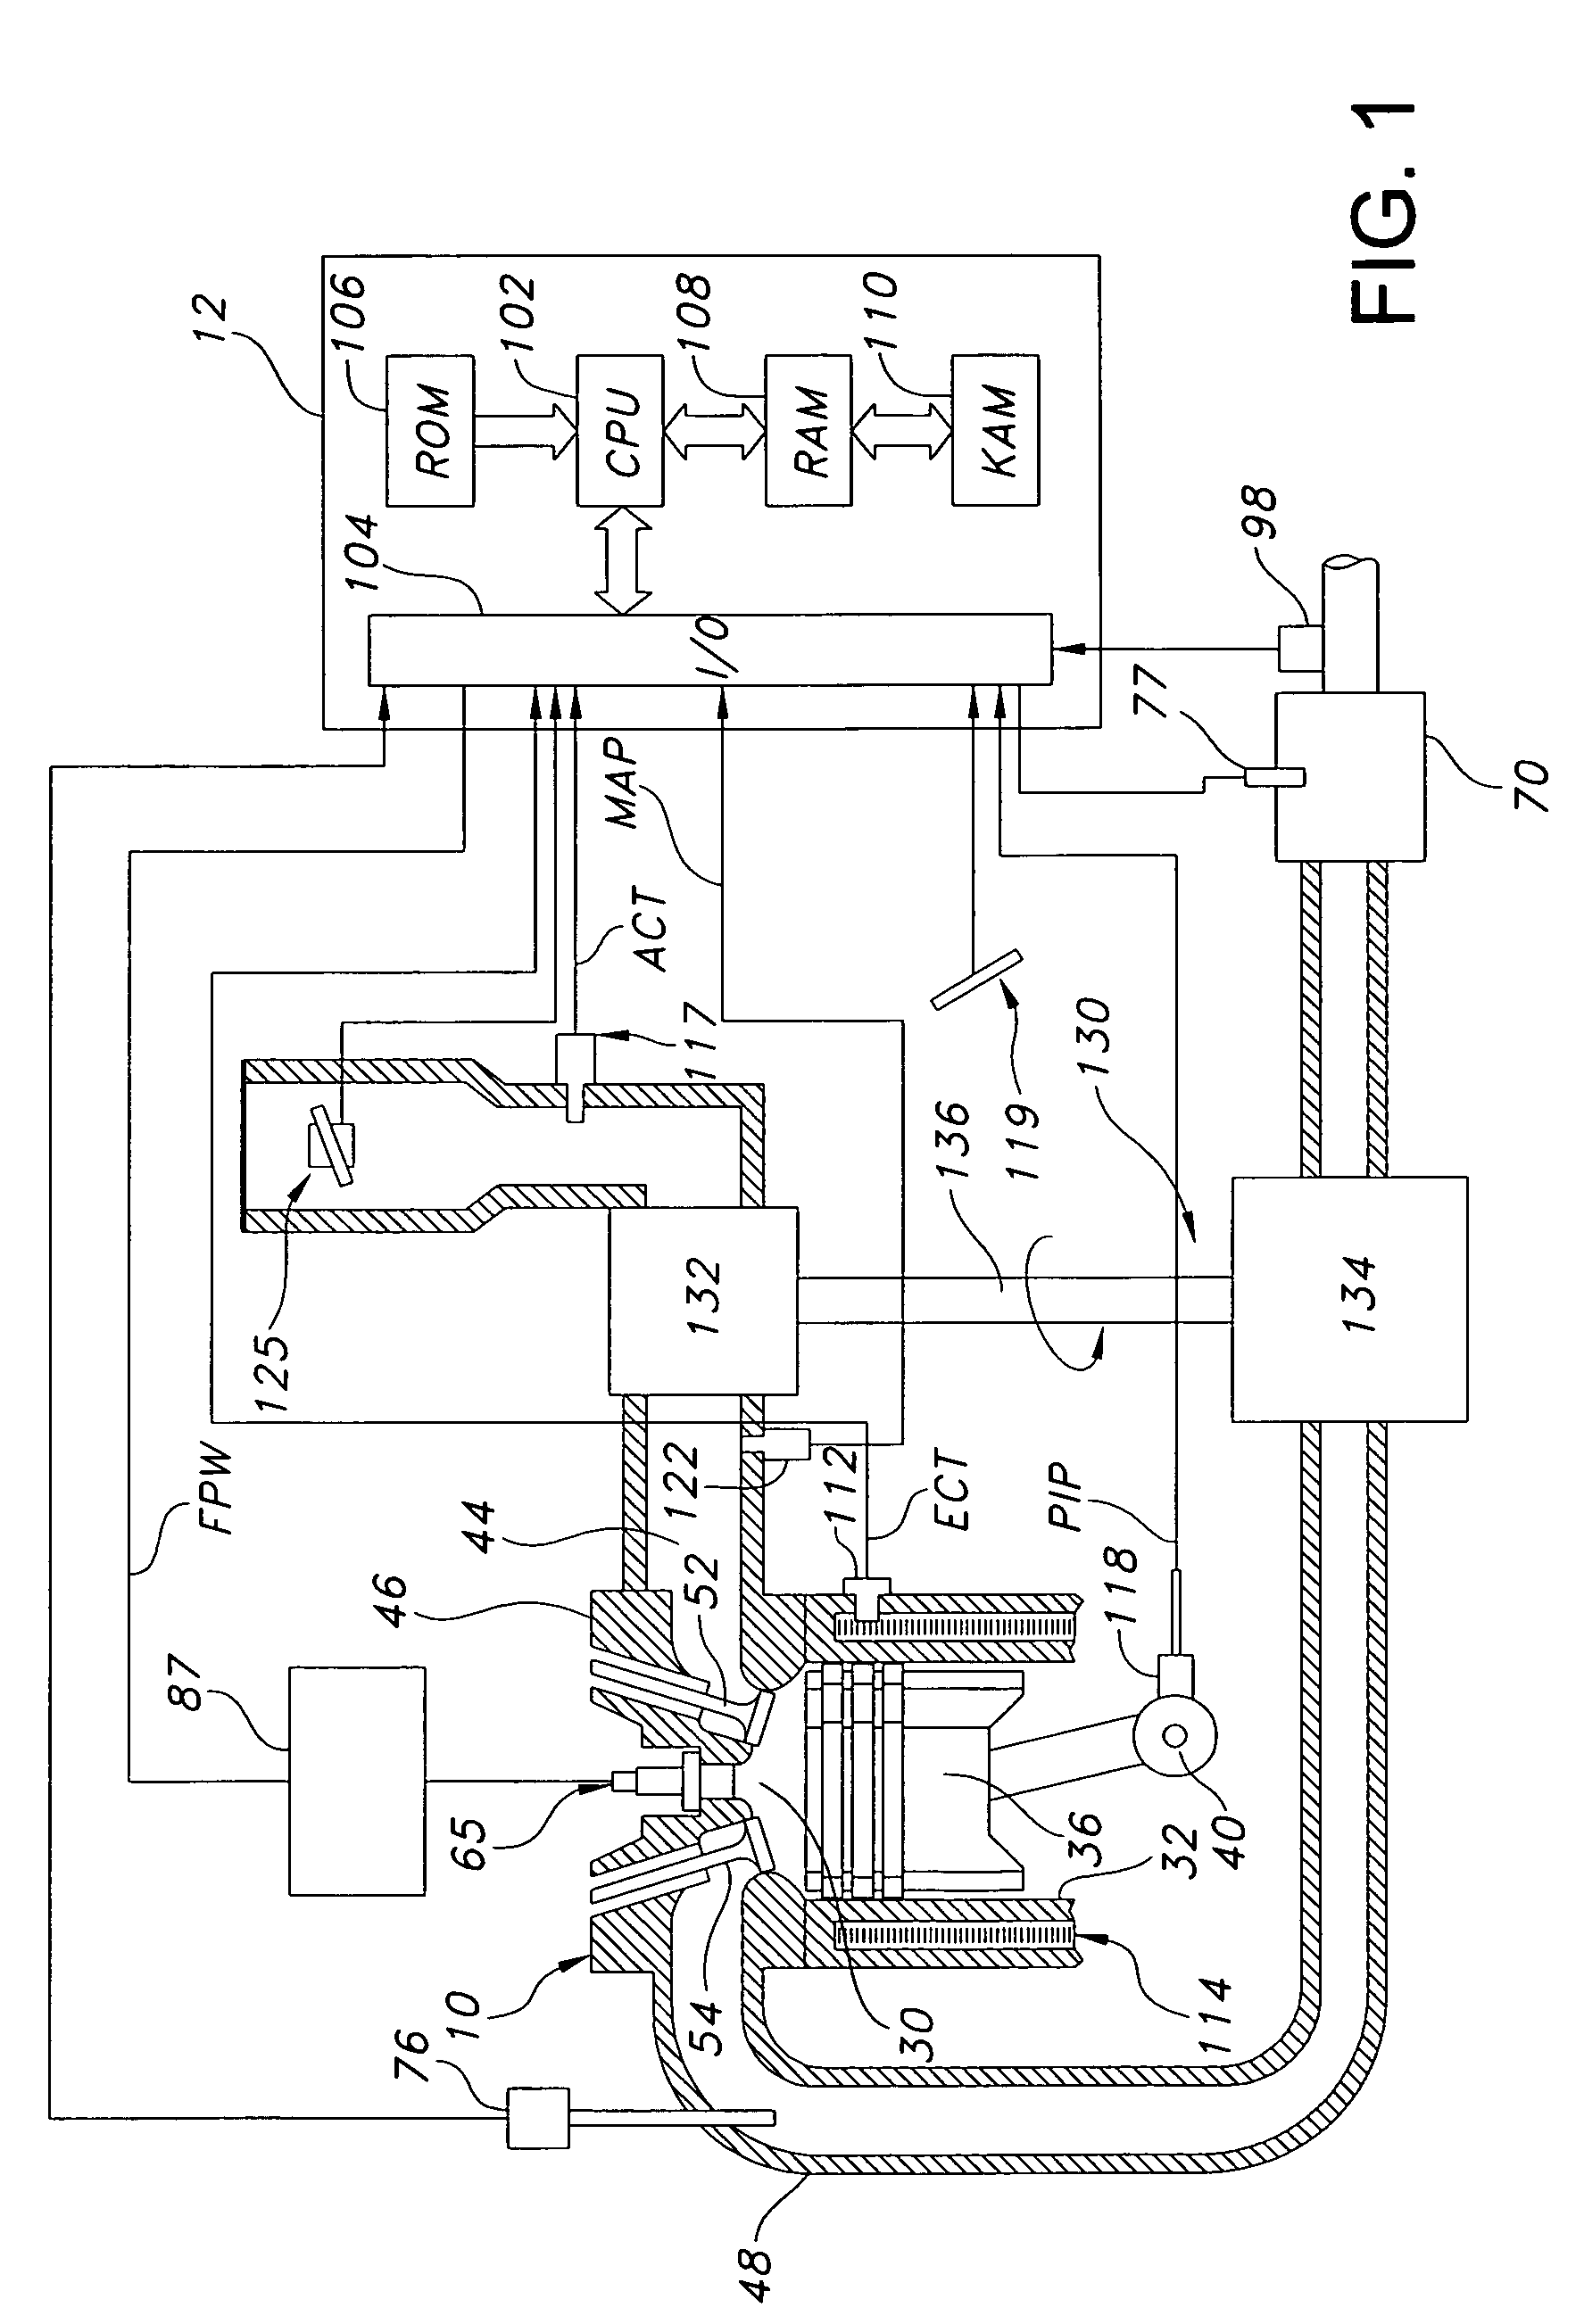 Turbo-lag compensation system for an engine